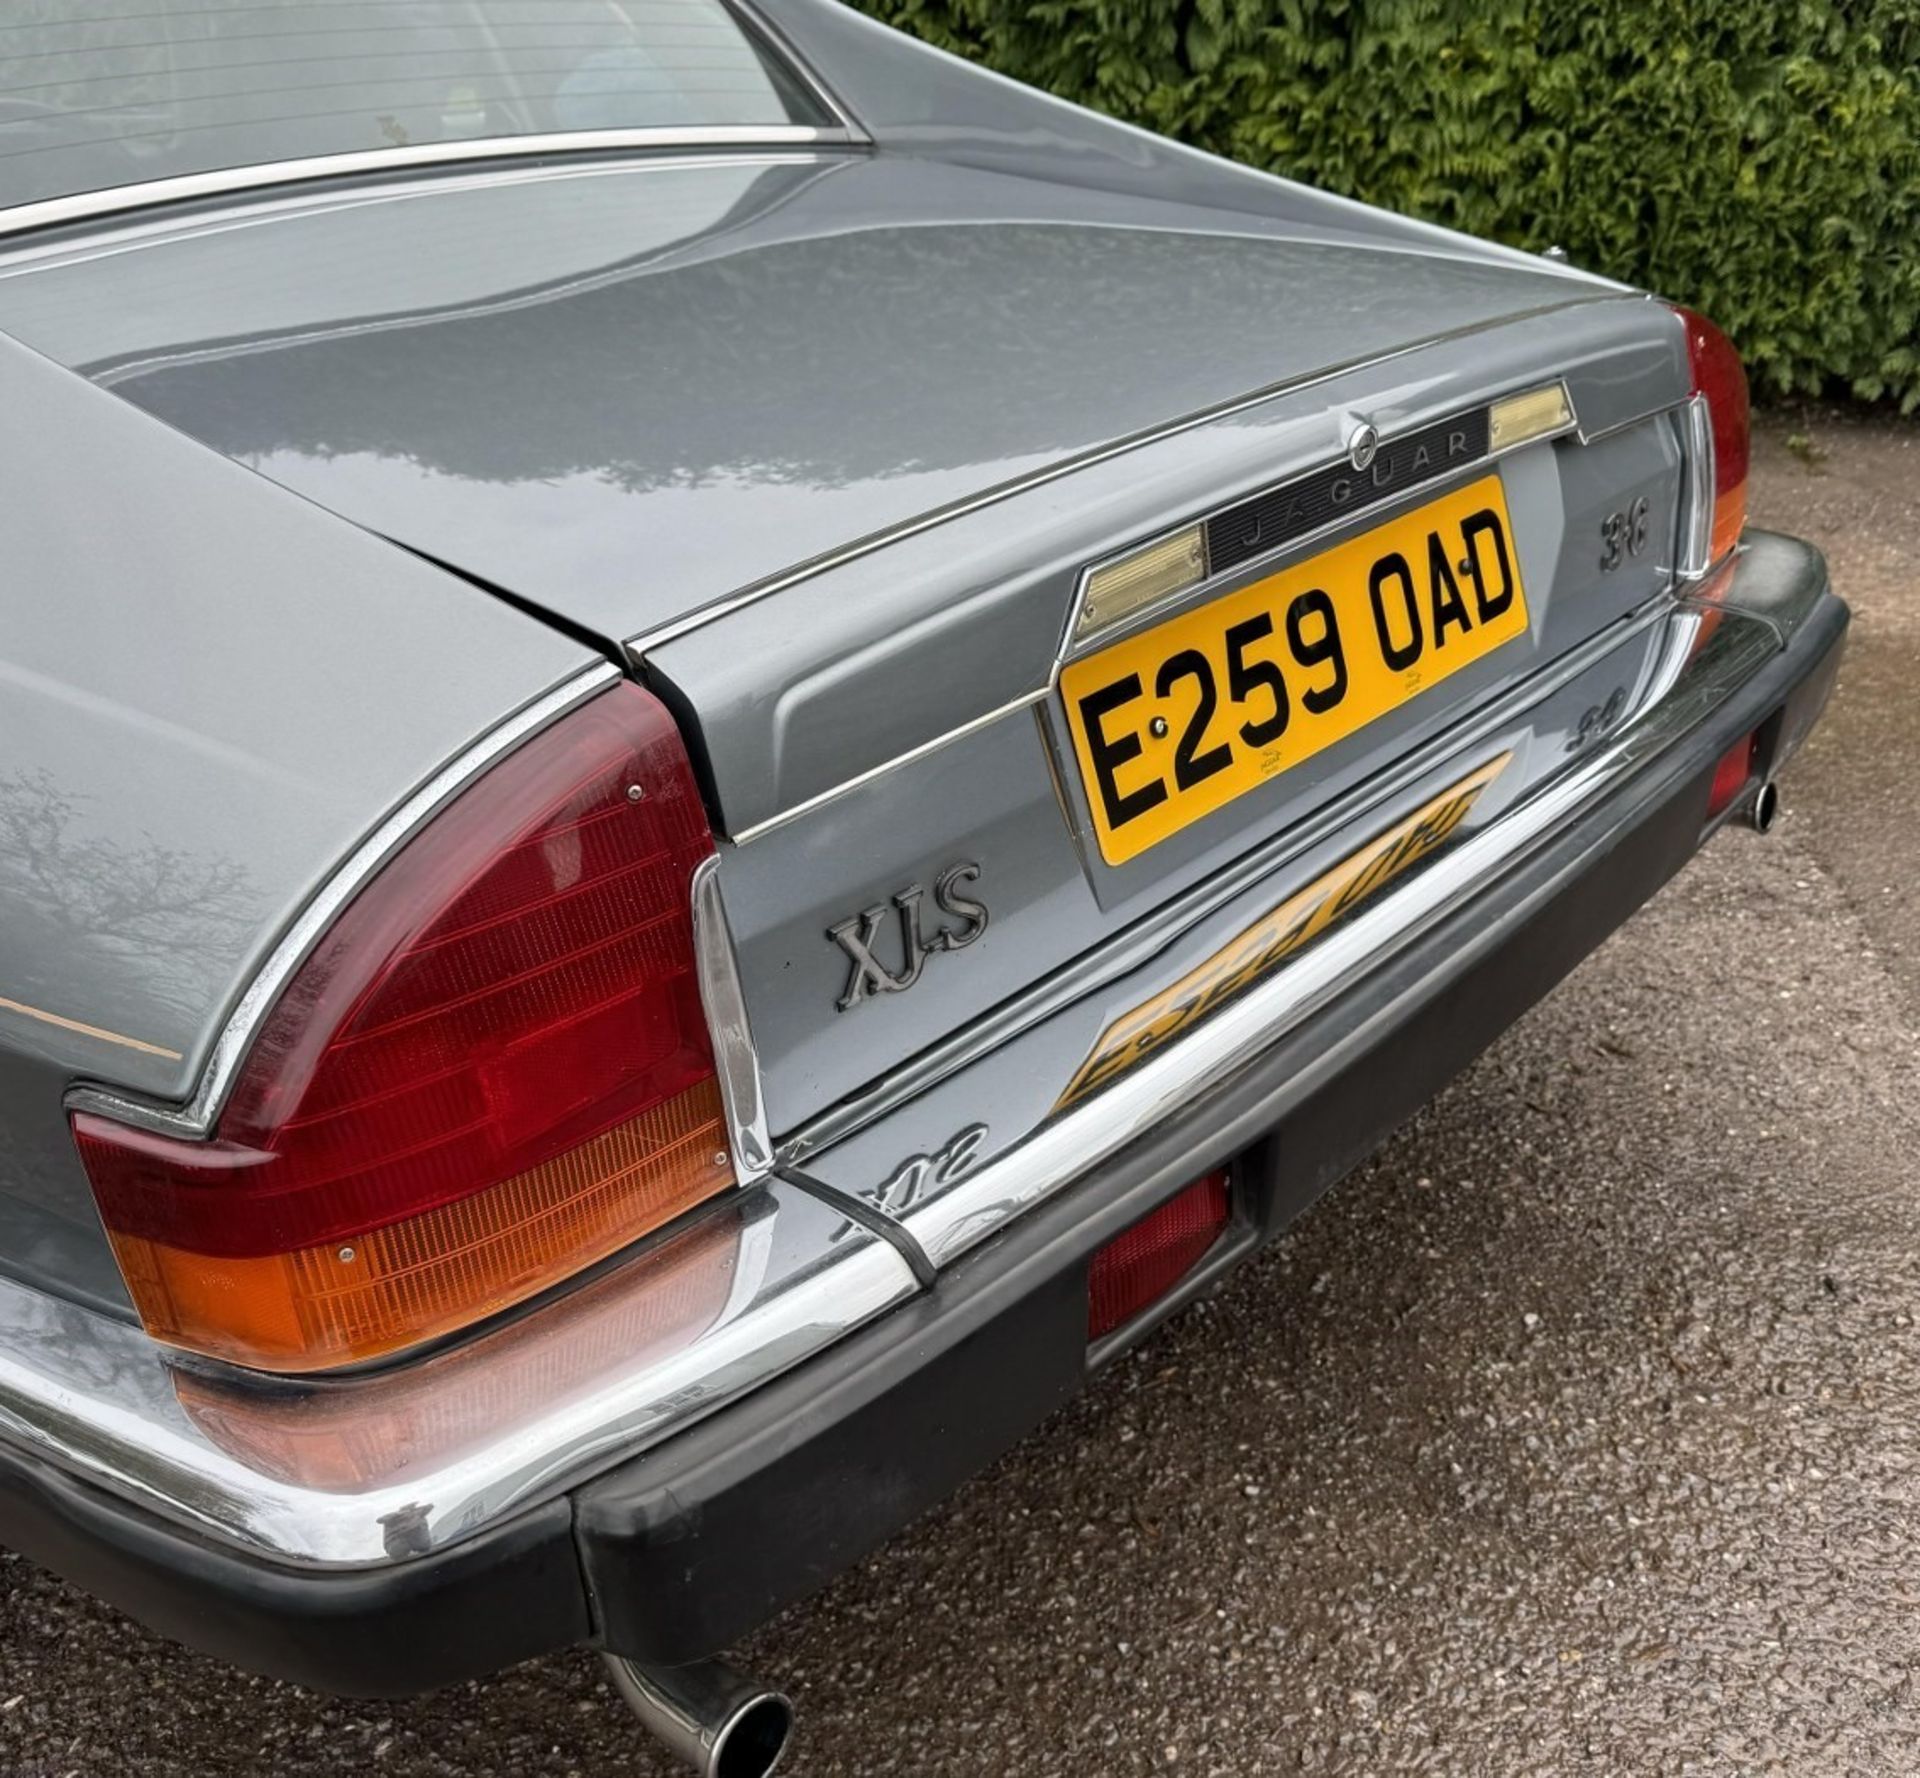 1988 Jaguar XJ-S 3.6 Coupe Registration number E259 OAD Metallic light blue with a half leather - Image 10 of 24